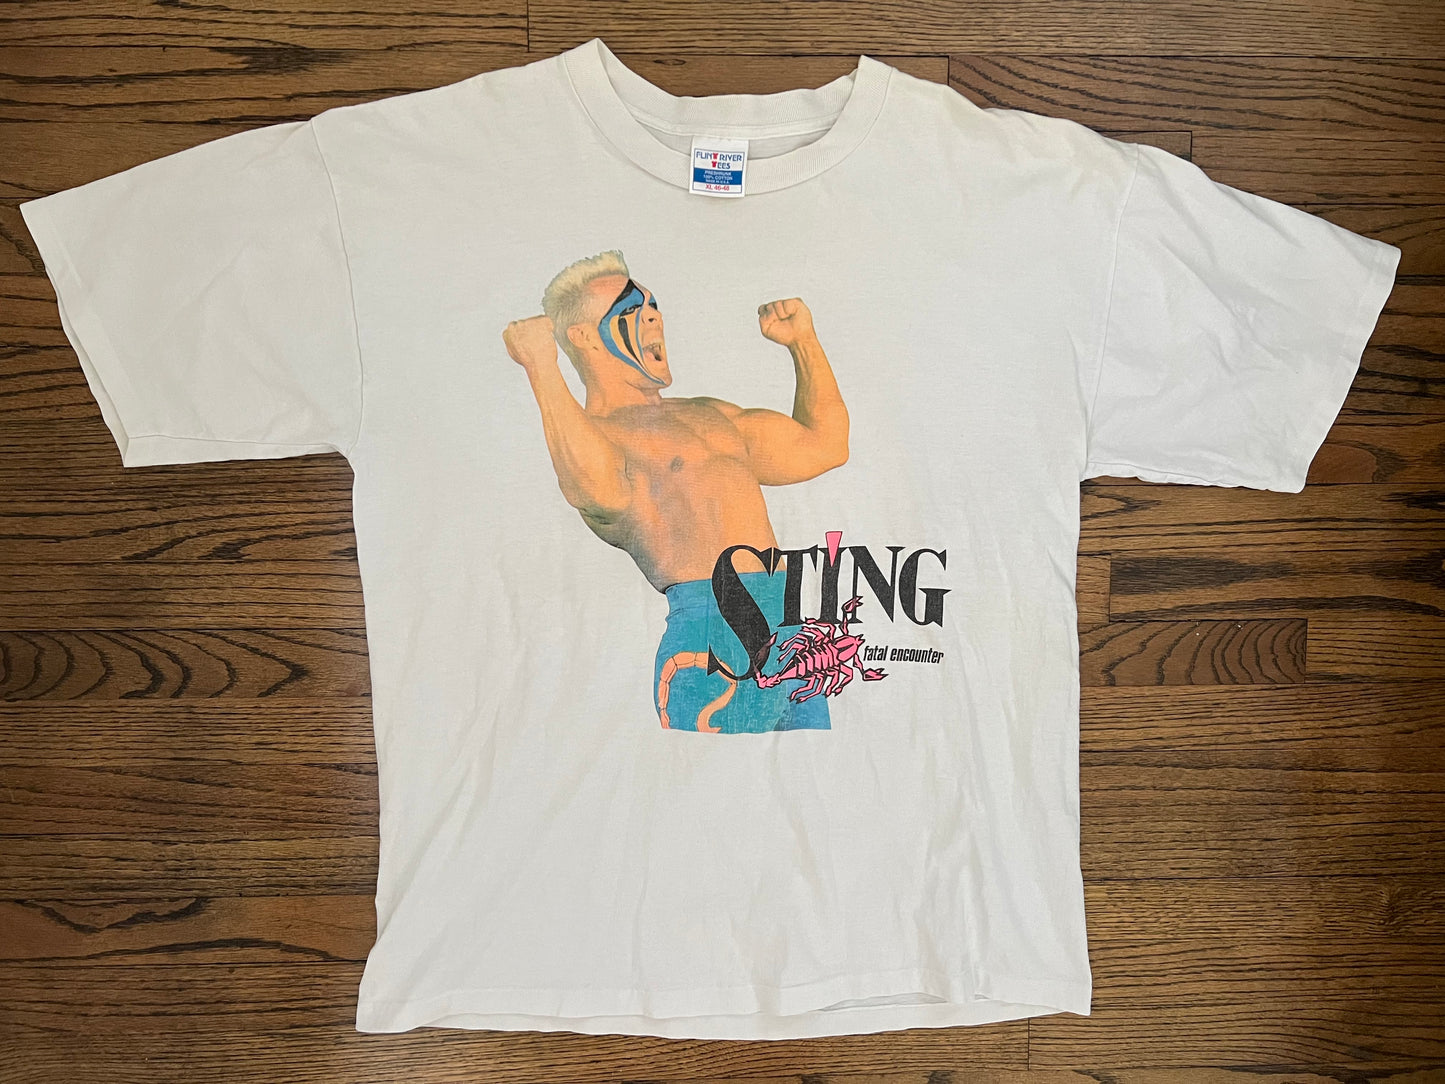 1990 WCW Sting “Fatal Encounter” two sided shirt with the WCW Logo on the back